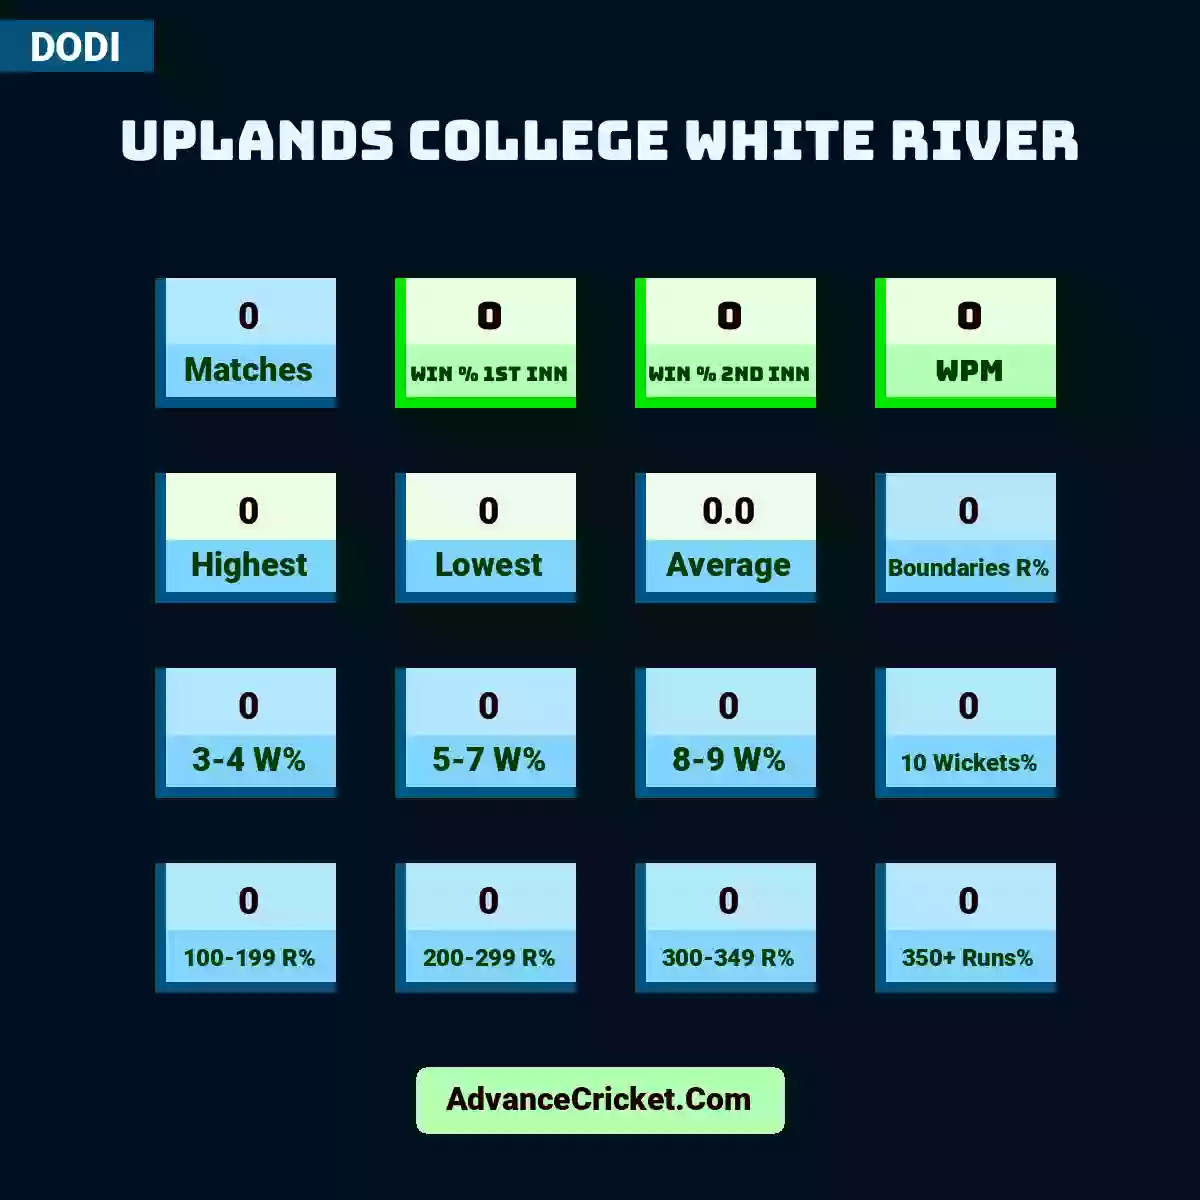 Image showing Uplands College White River with Matches: 0, Win % 1st Inn: 0, Win % 2nd Inn: 0, WPM: 0, Highest: 0, Lowest: 0, Average: 0.0, Boundaries R%: 0, 3-4 W%: 0, 5-7 W%: 0, 8-9 W%: 0, 10 Wickets%: 0, 100-199 R%: 0, 200-299 R%: 0, 300-349 R%: 0, 350+ Runs%: 0.